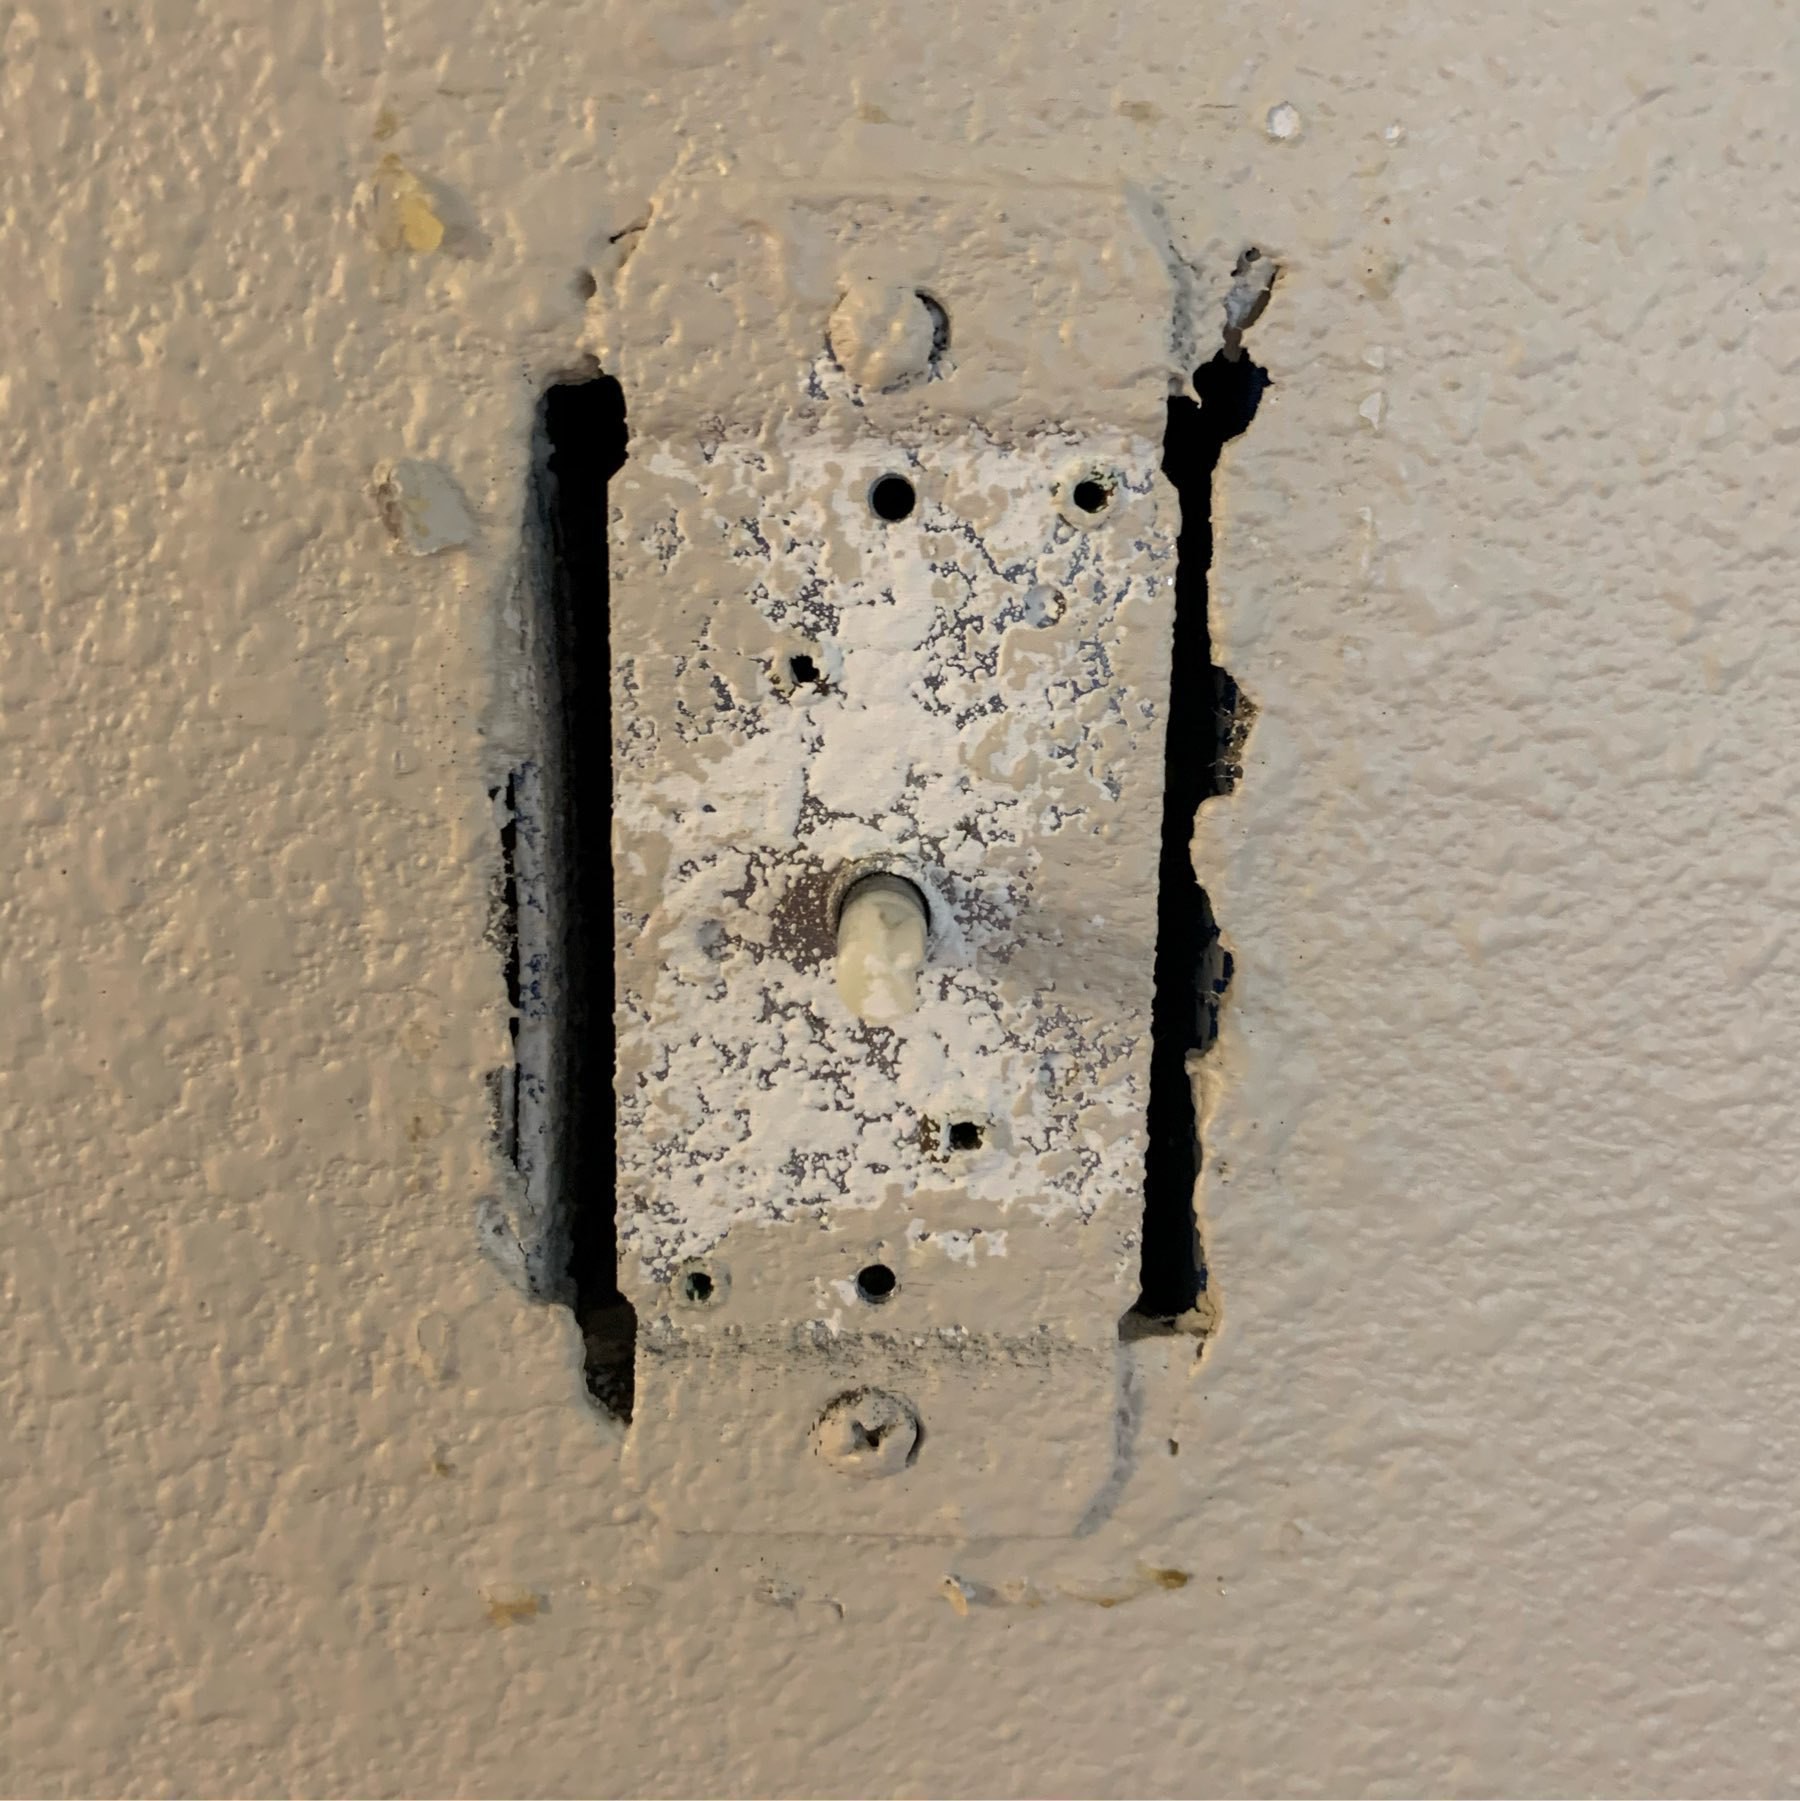 Painted over electrical light dimmer. 